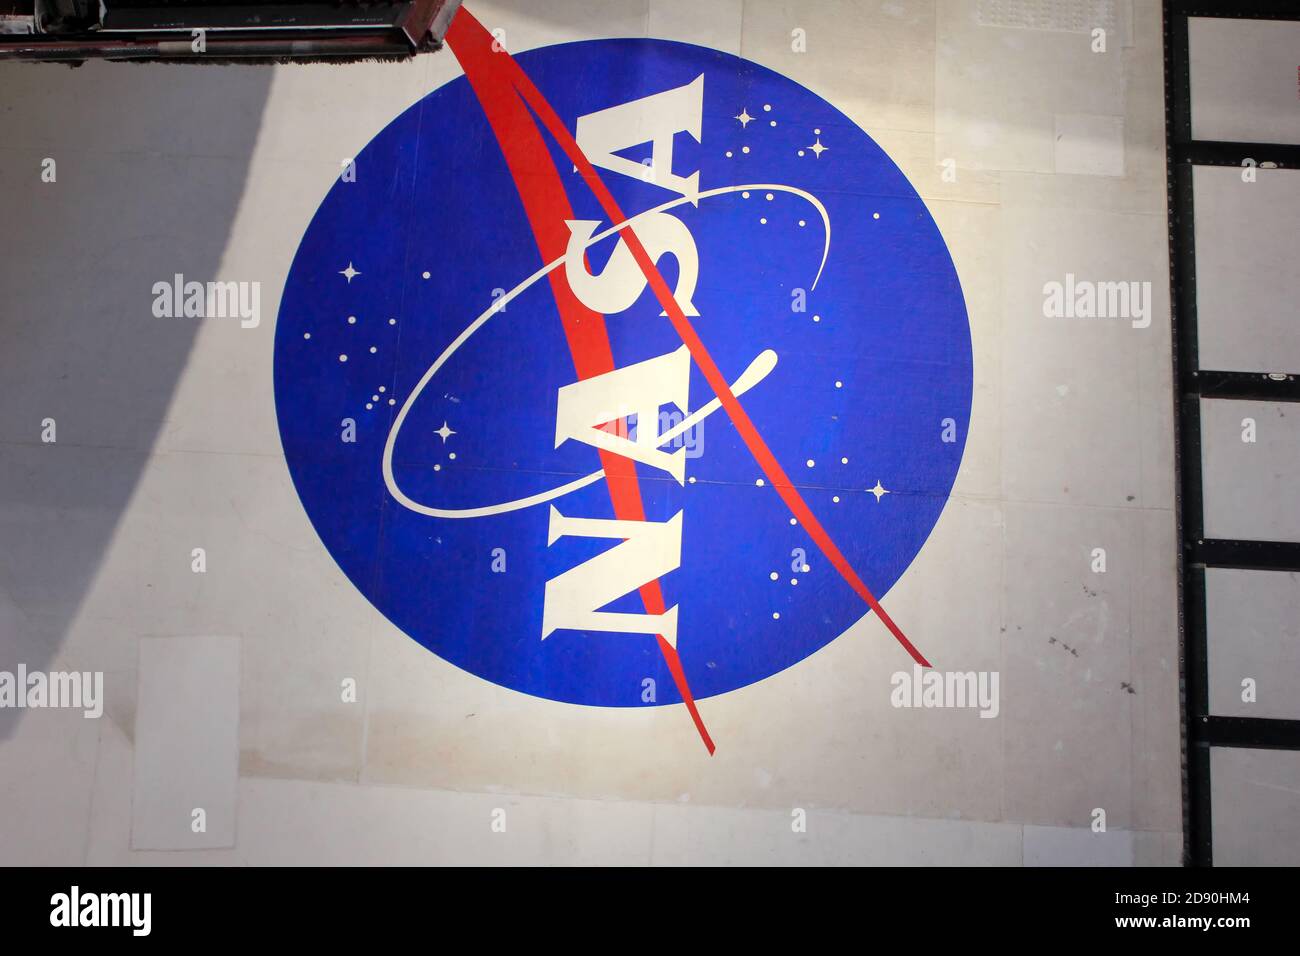 NASA Logo on Globe at Kennedy Space Center Visitor Complex in Cape Canaveral, Florida, USA. To the left is a painting visible of John F. Kennedy. Stock Photo